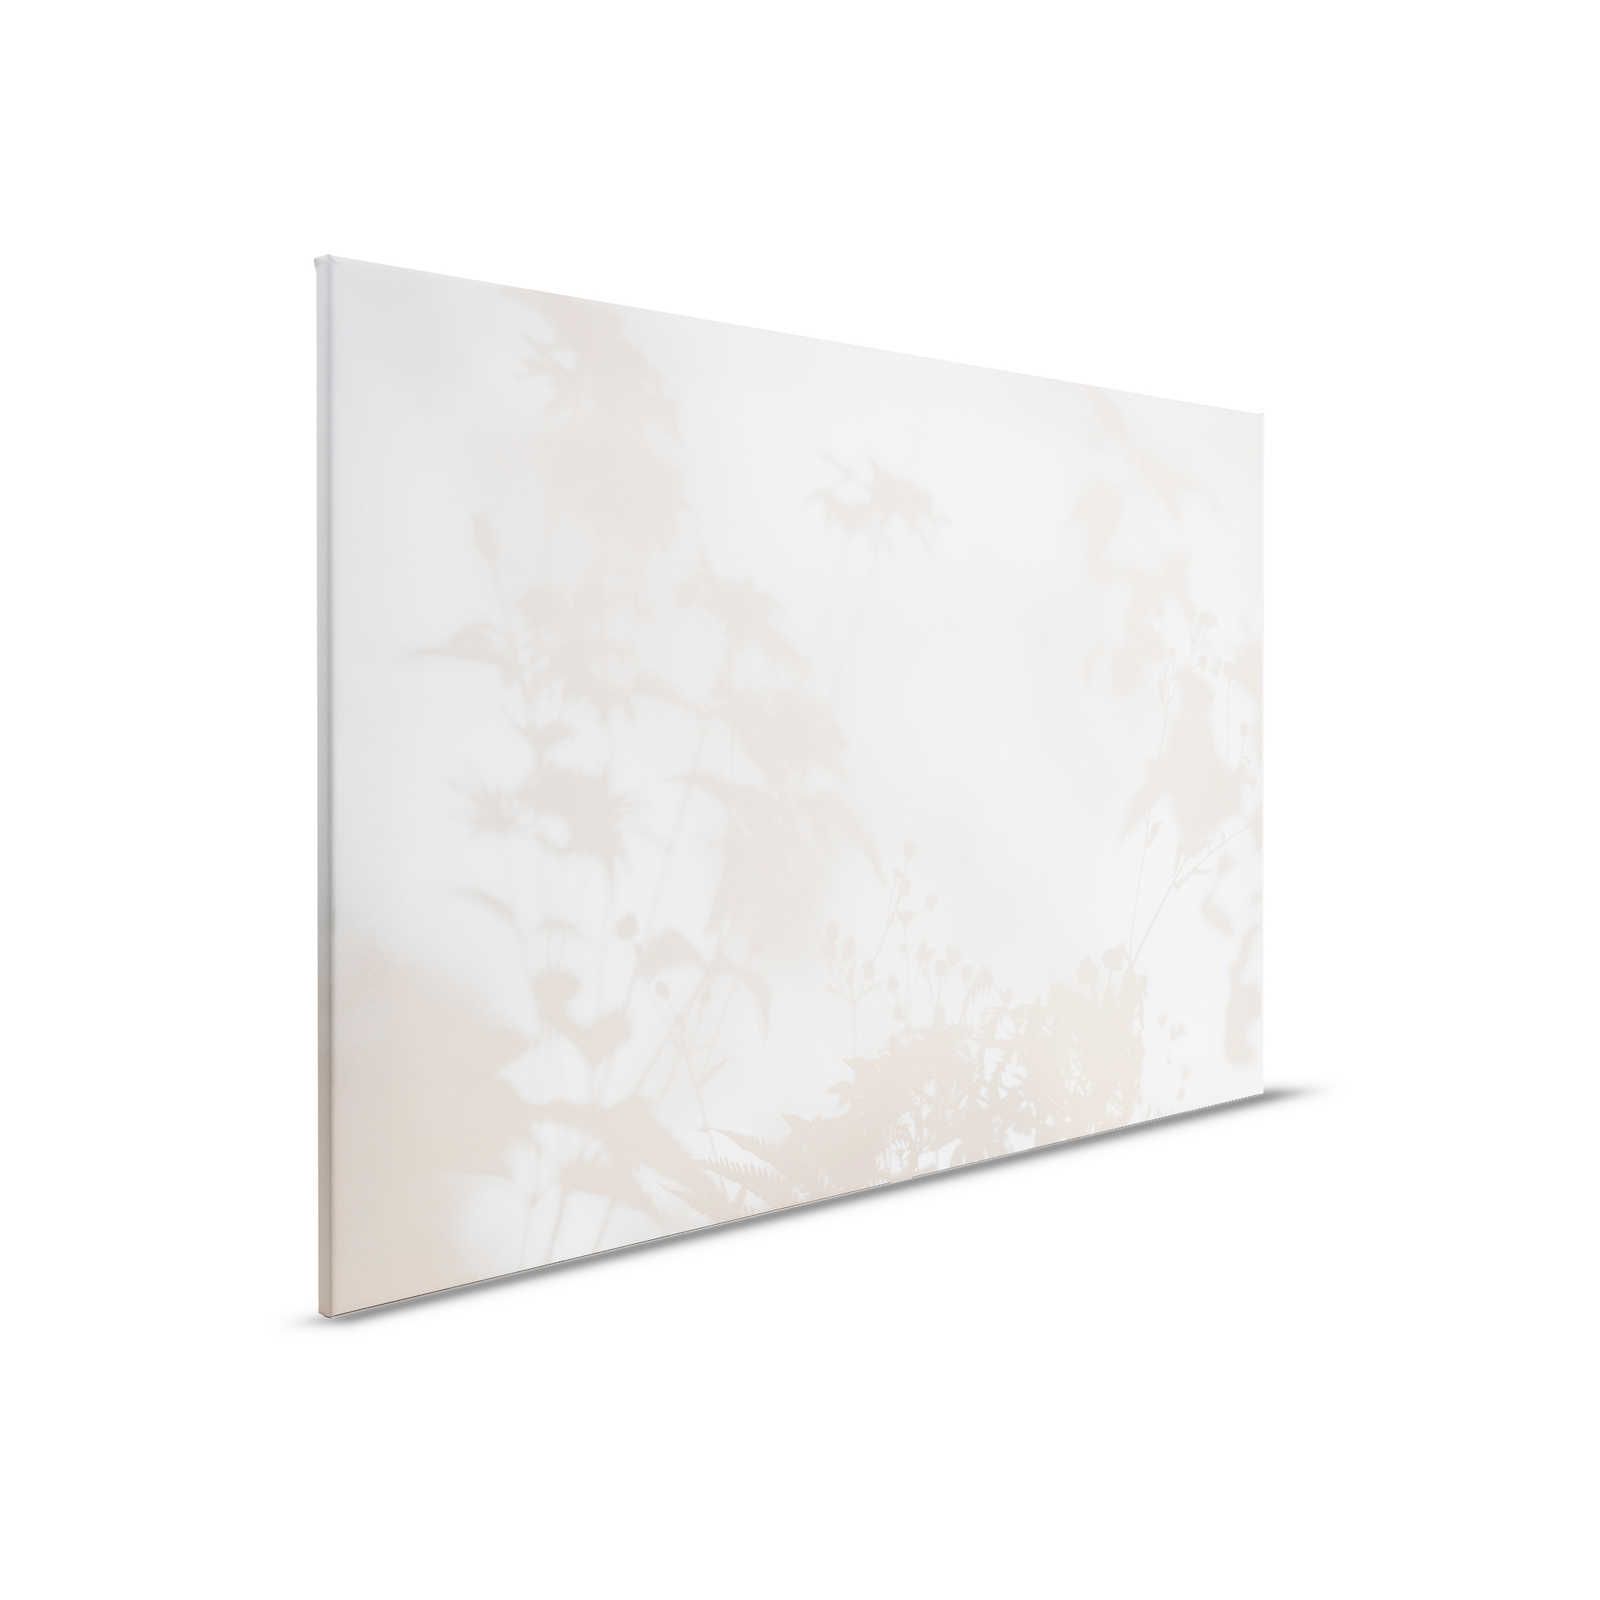 Shadow Room 1 - Nature Canvas painting Beige & White, faded design - 0.90 m x 0.60 m
